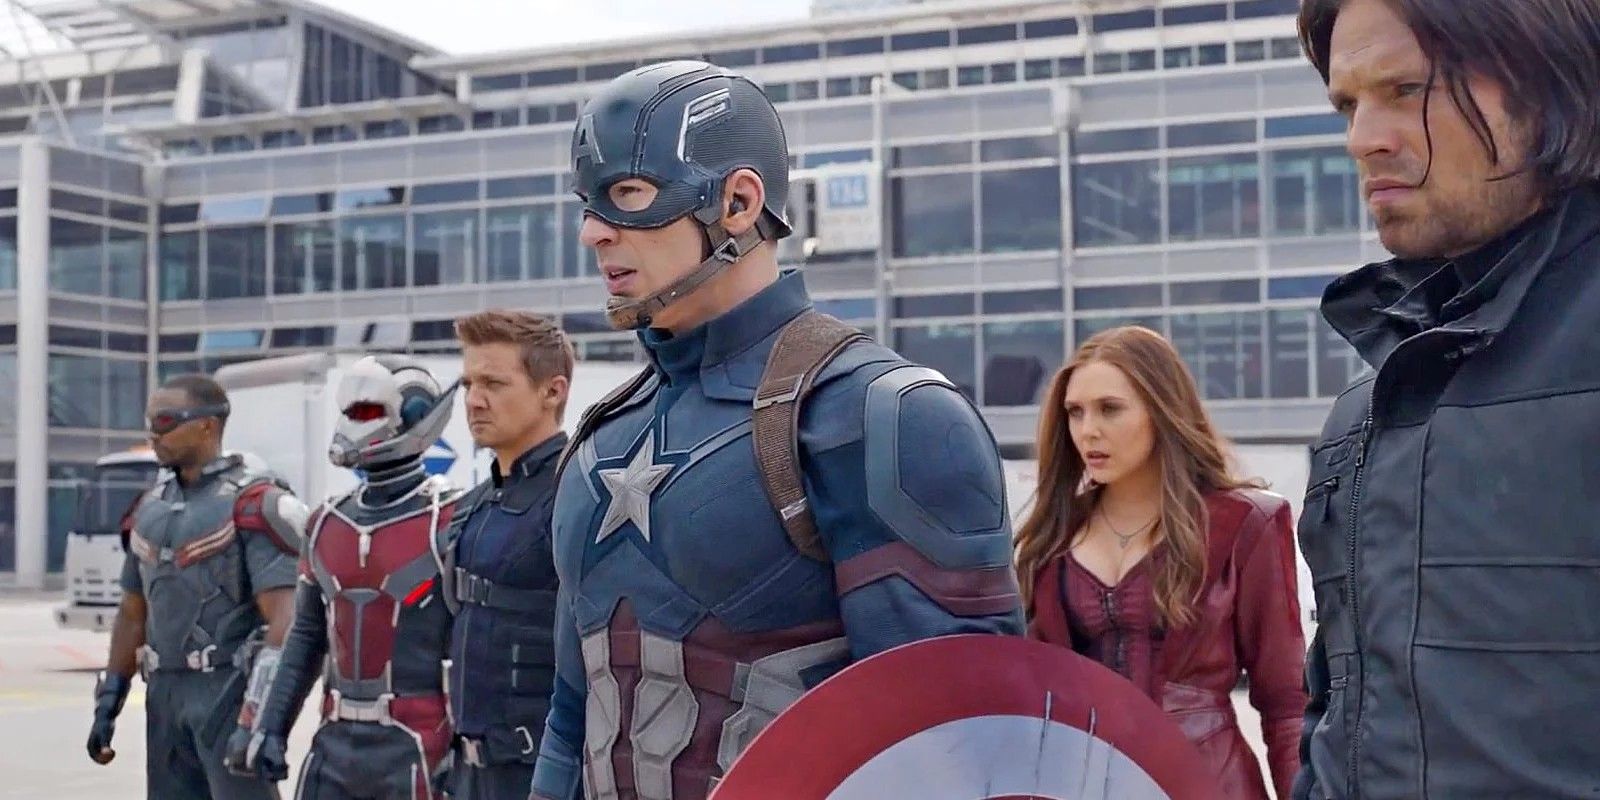 Captain America and his allies are stood in a line, looking over to the opposition